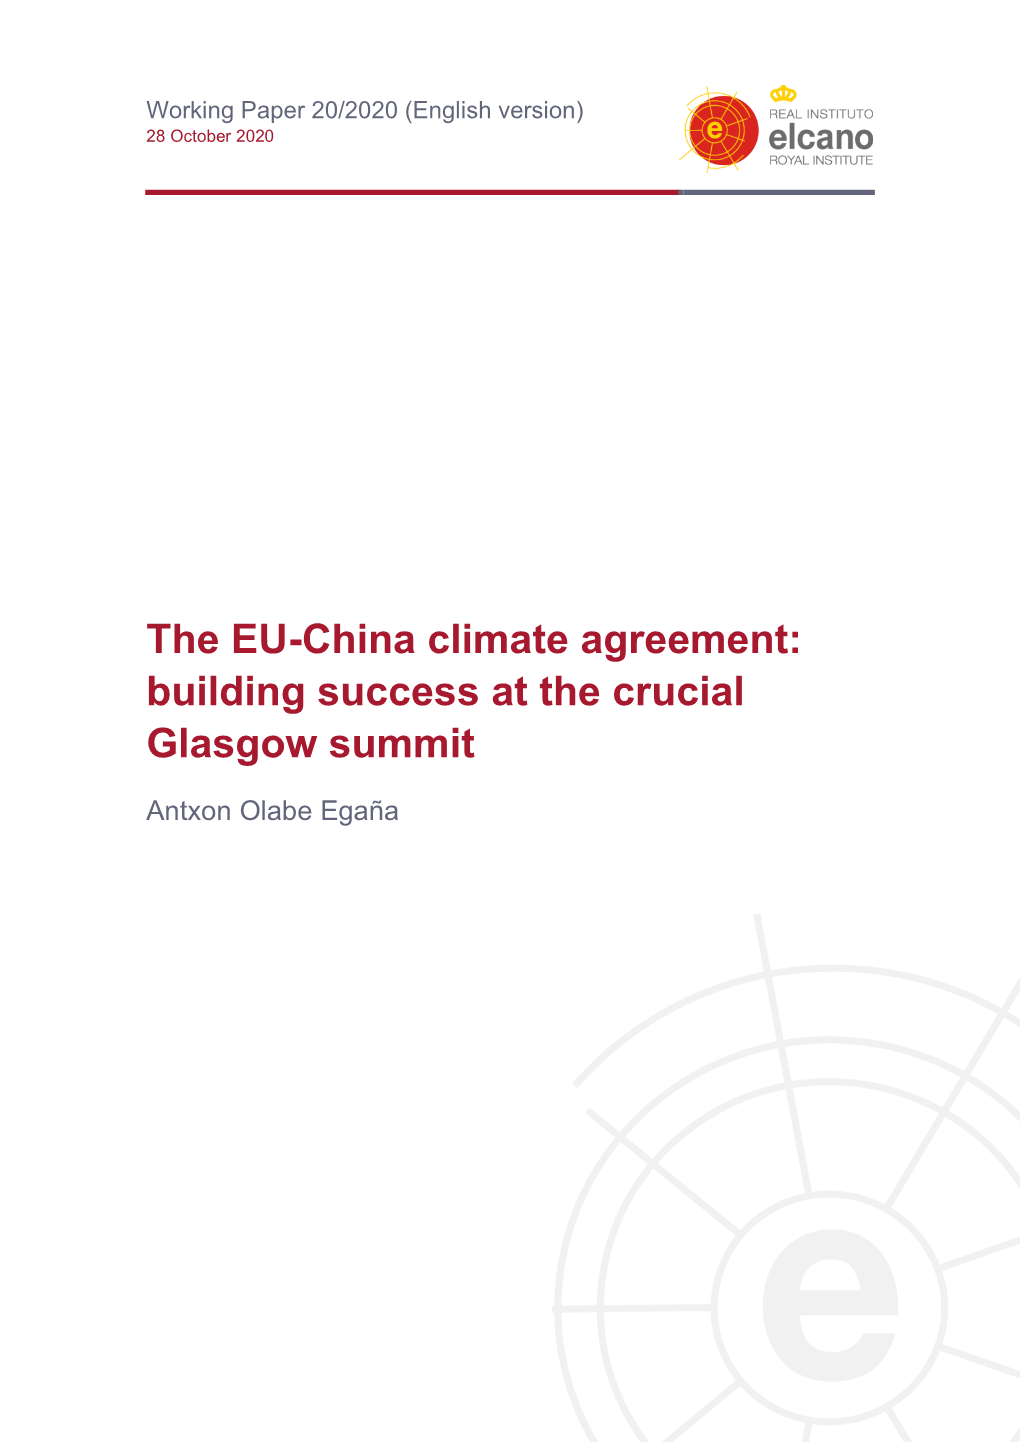 The EU-China Climate Agreement: Building Success at the Crucial Glasgow Summit